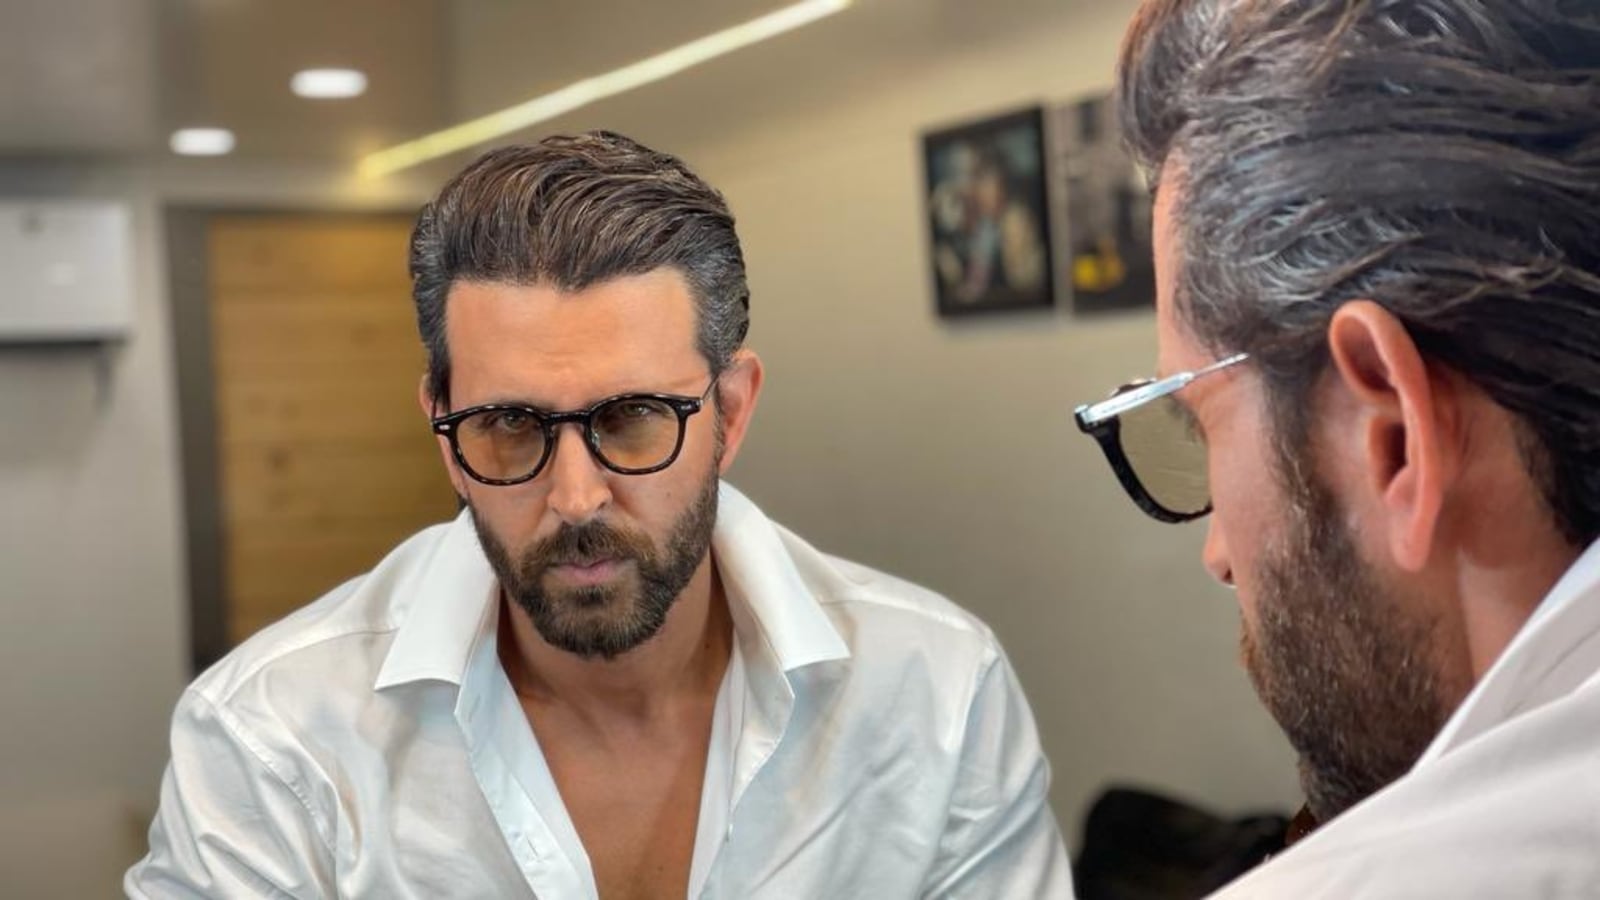 Hrithik Roshan channels Vedha in new pic, fans can’t stop gushing over his salt and pepper look